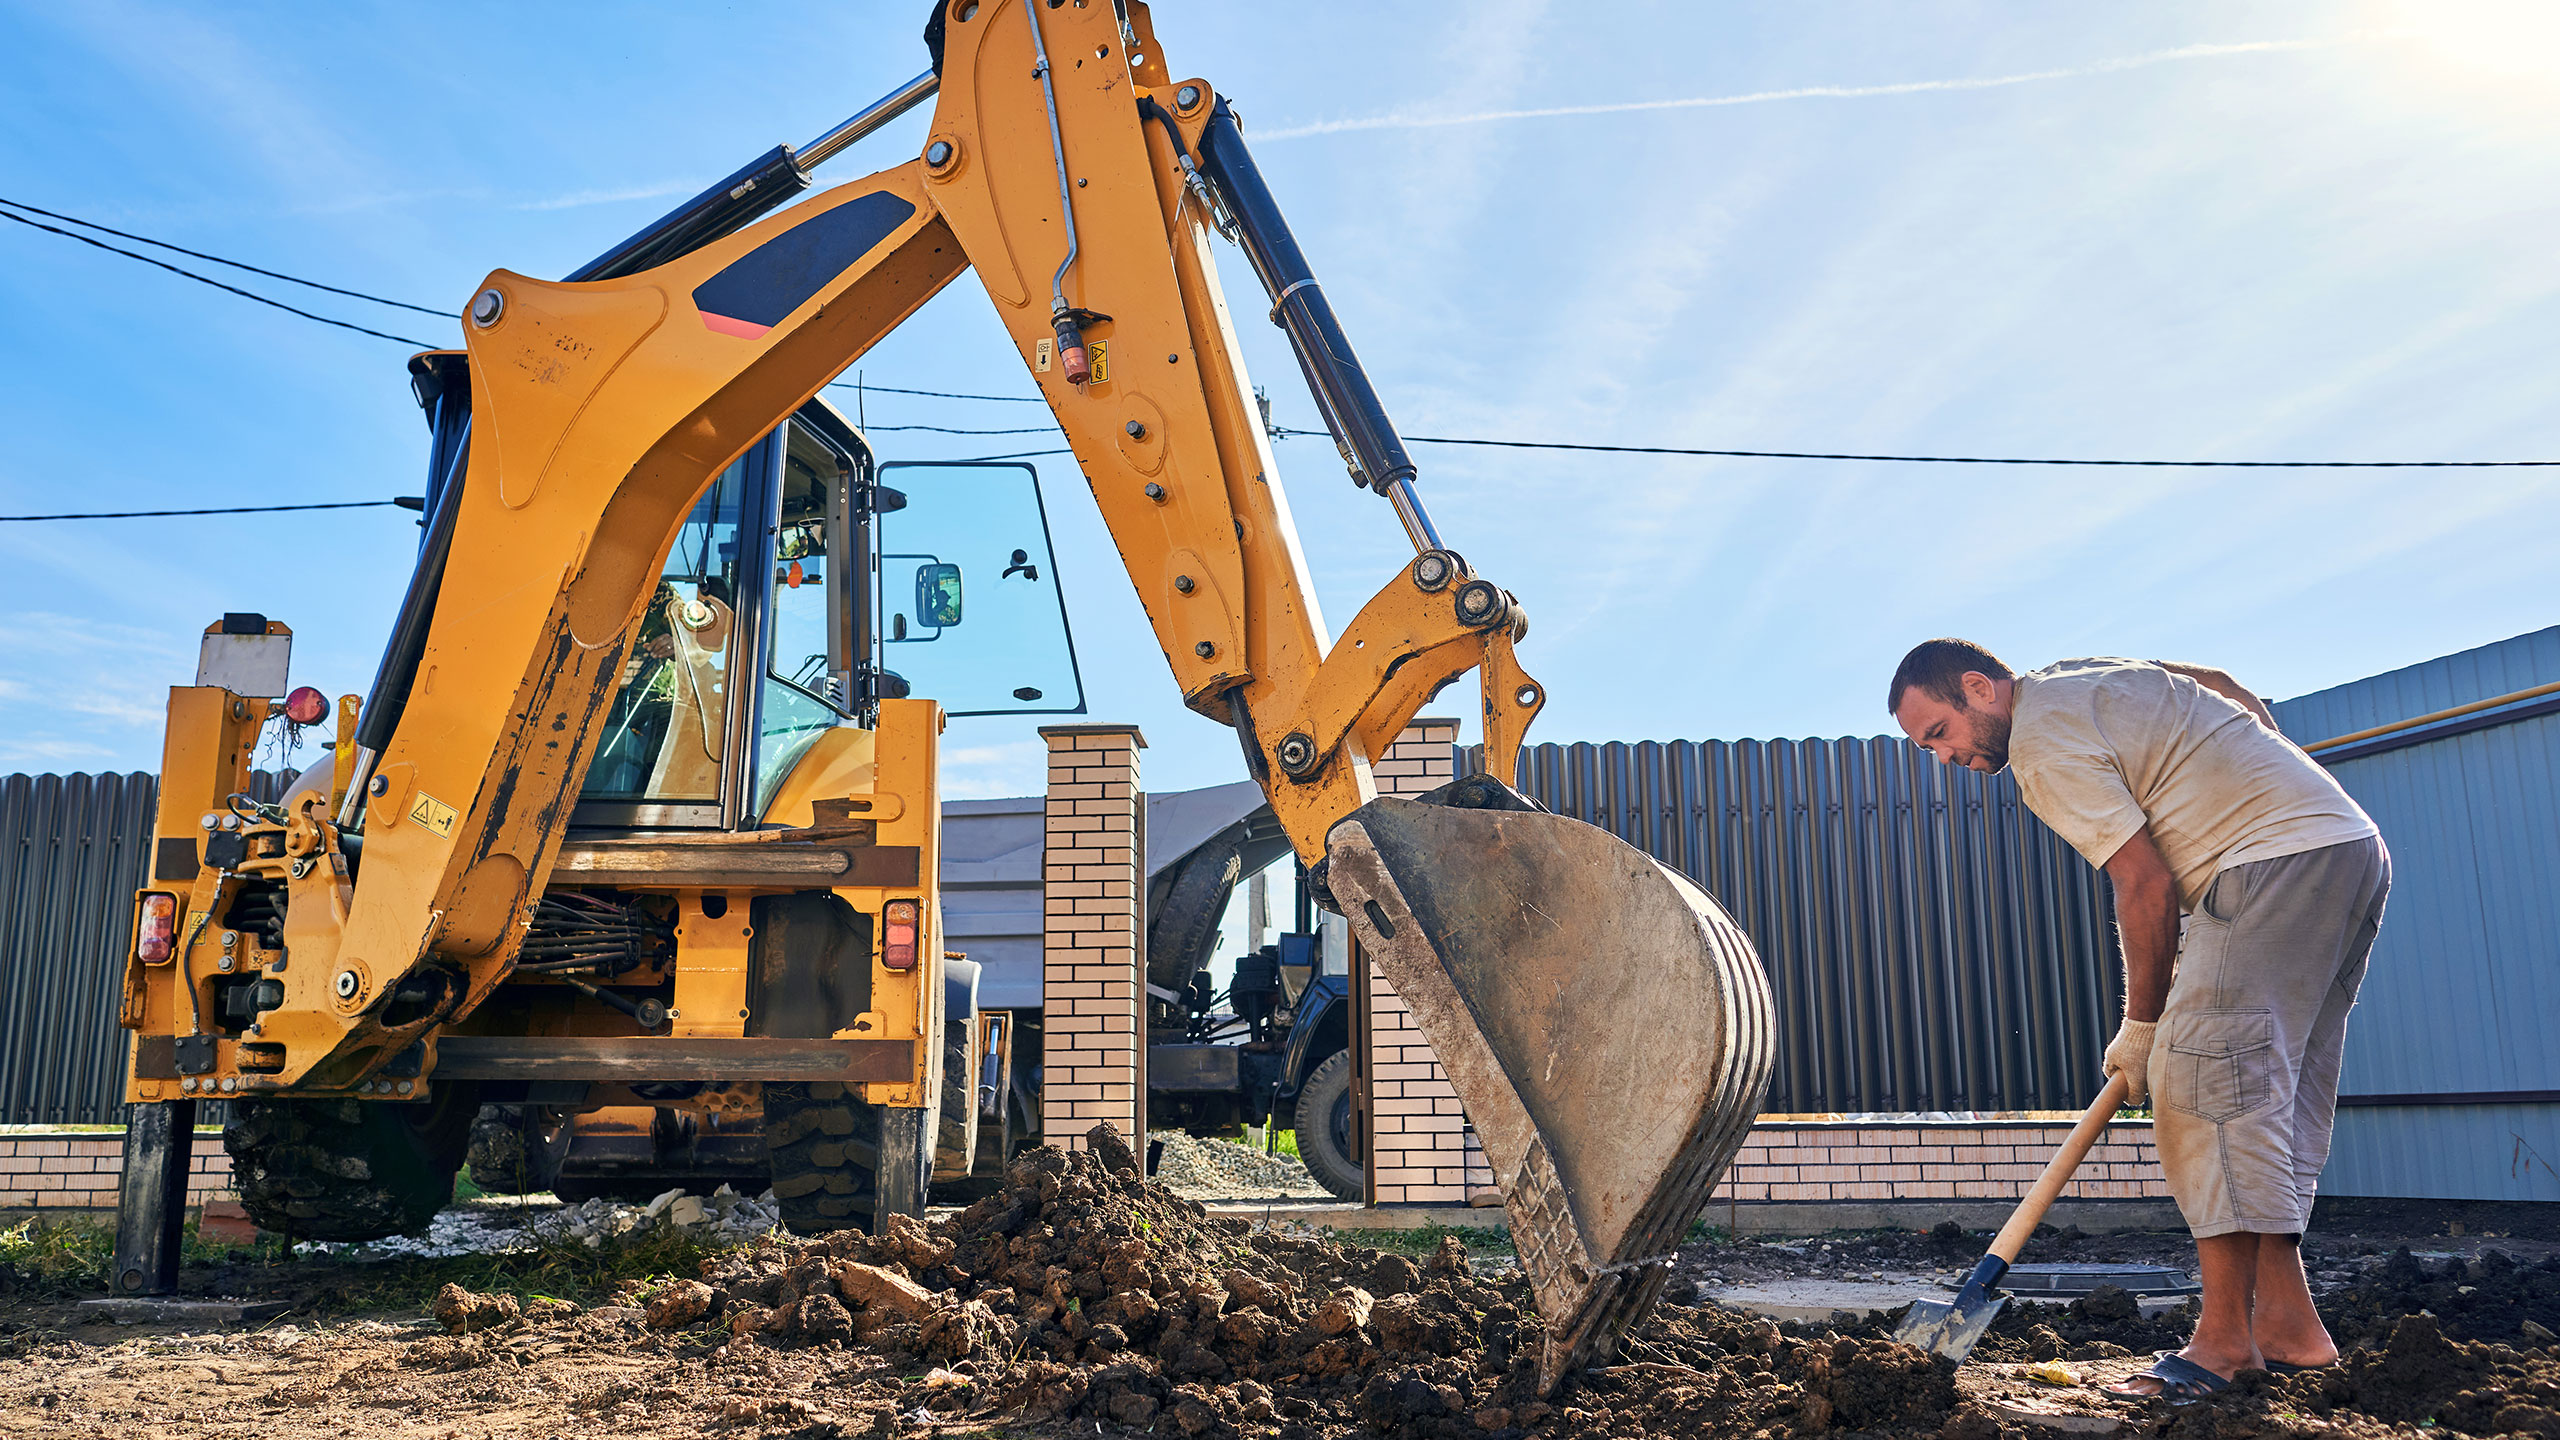 A heavy excavator with excavator hire insurance applied